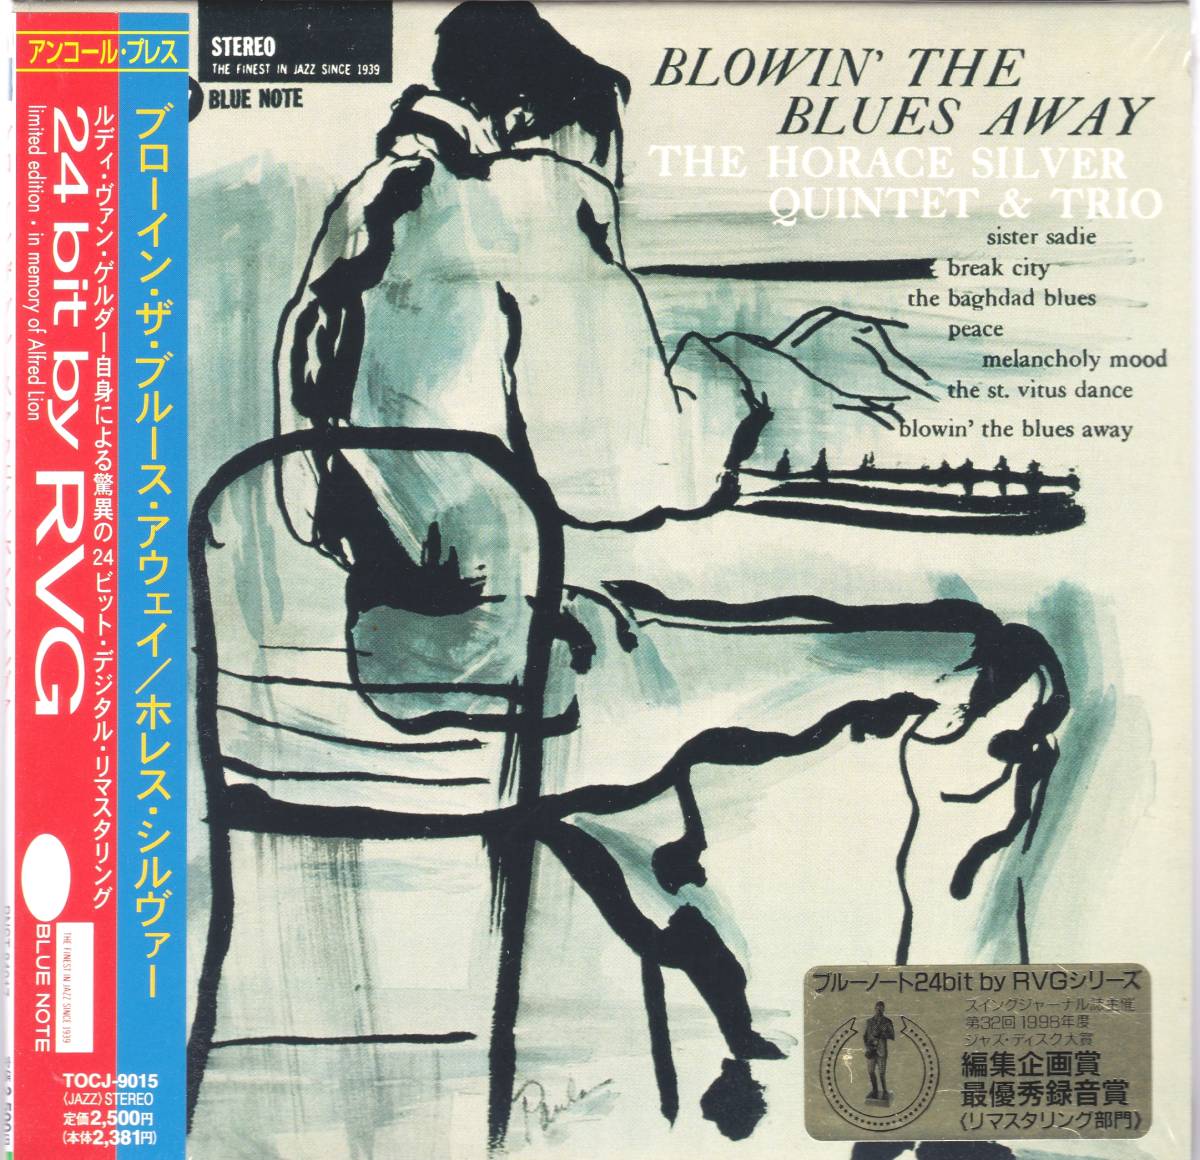 ☆THE HORACE SILVER(ホレス・シルヴァー) QUINTET＆TRIO/Blowin' The Blues Away◆59年録音の超大名盤◇限定紙ジャケ＆奇跡の未開封新品★の画像1